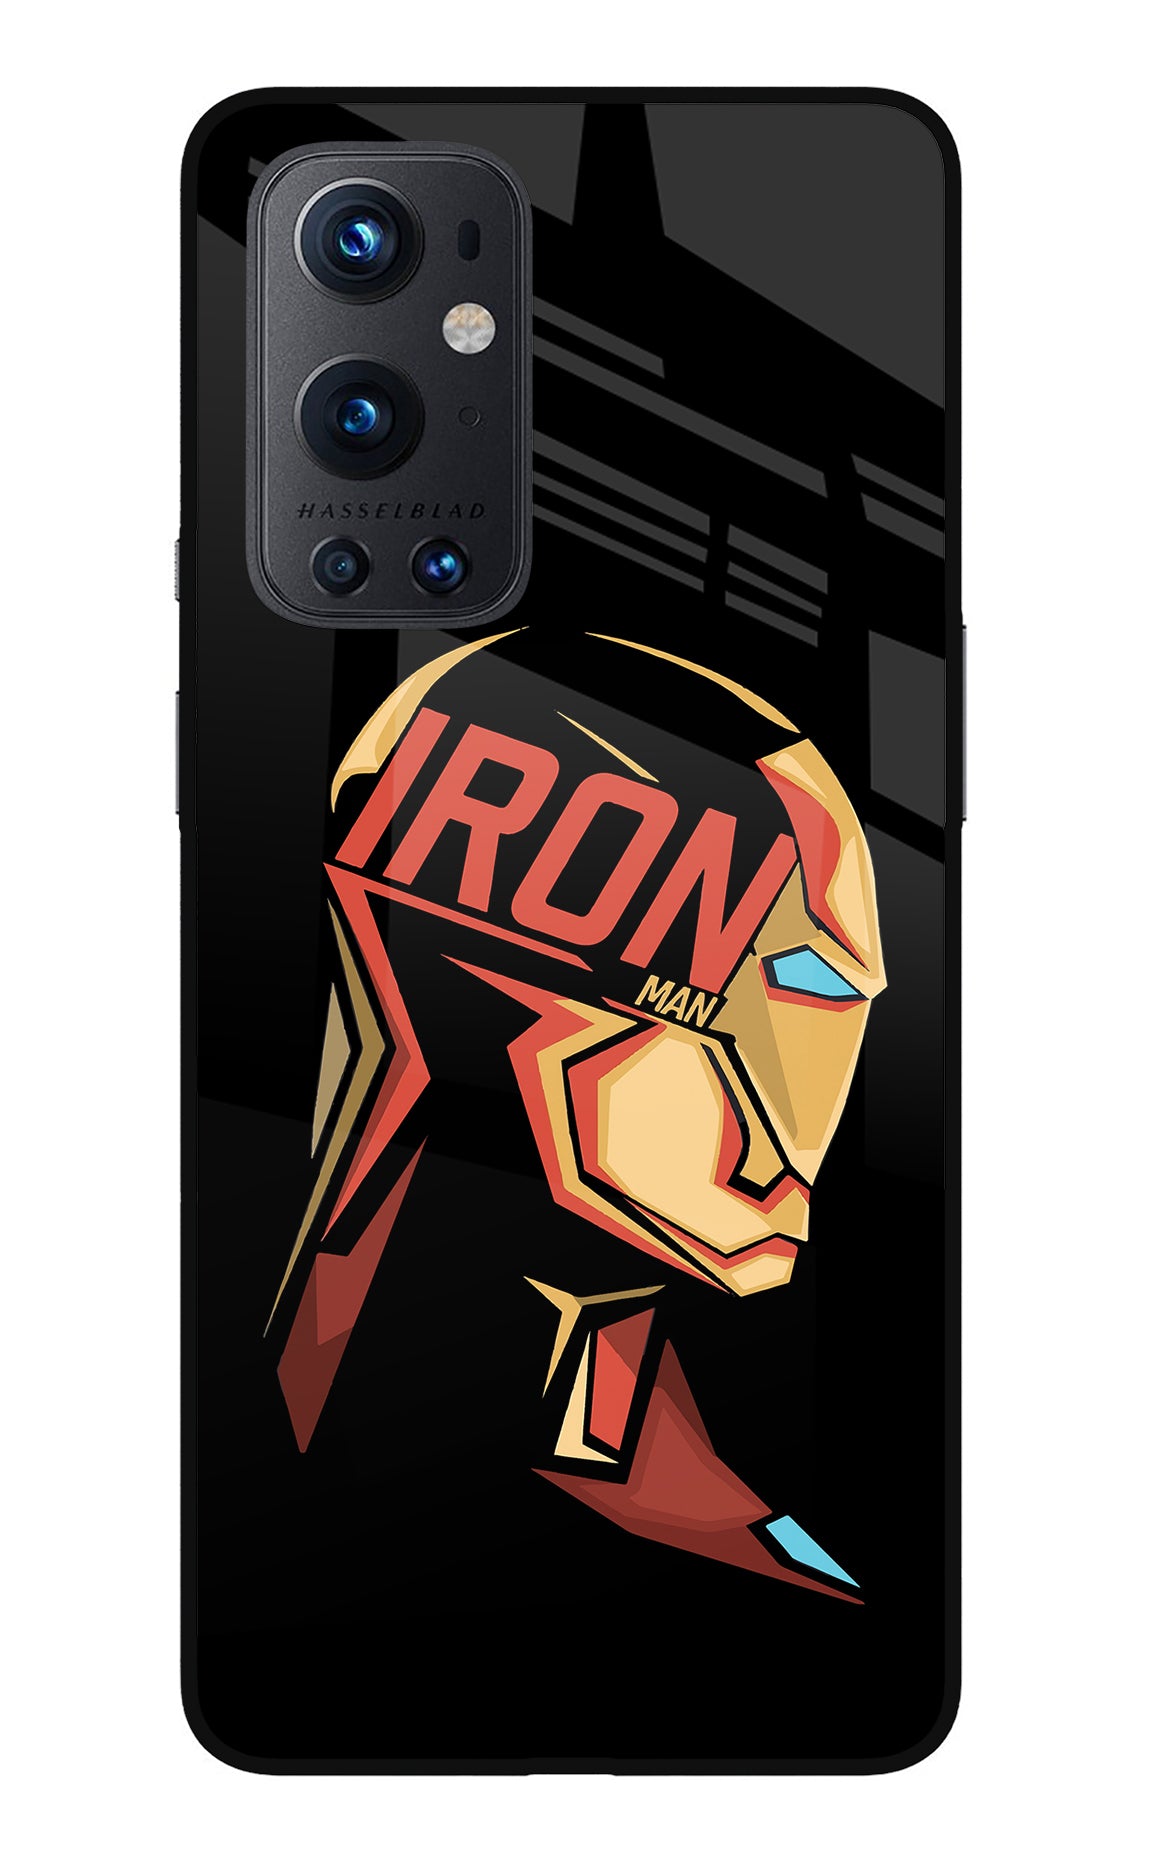 IronMan Oneplus 9 Pro Back Cover